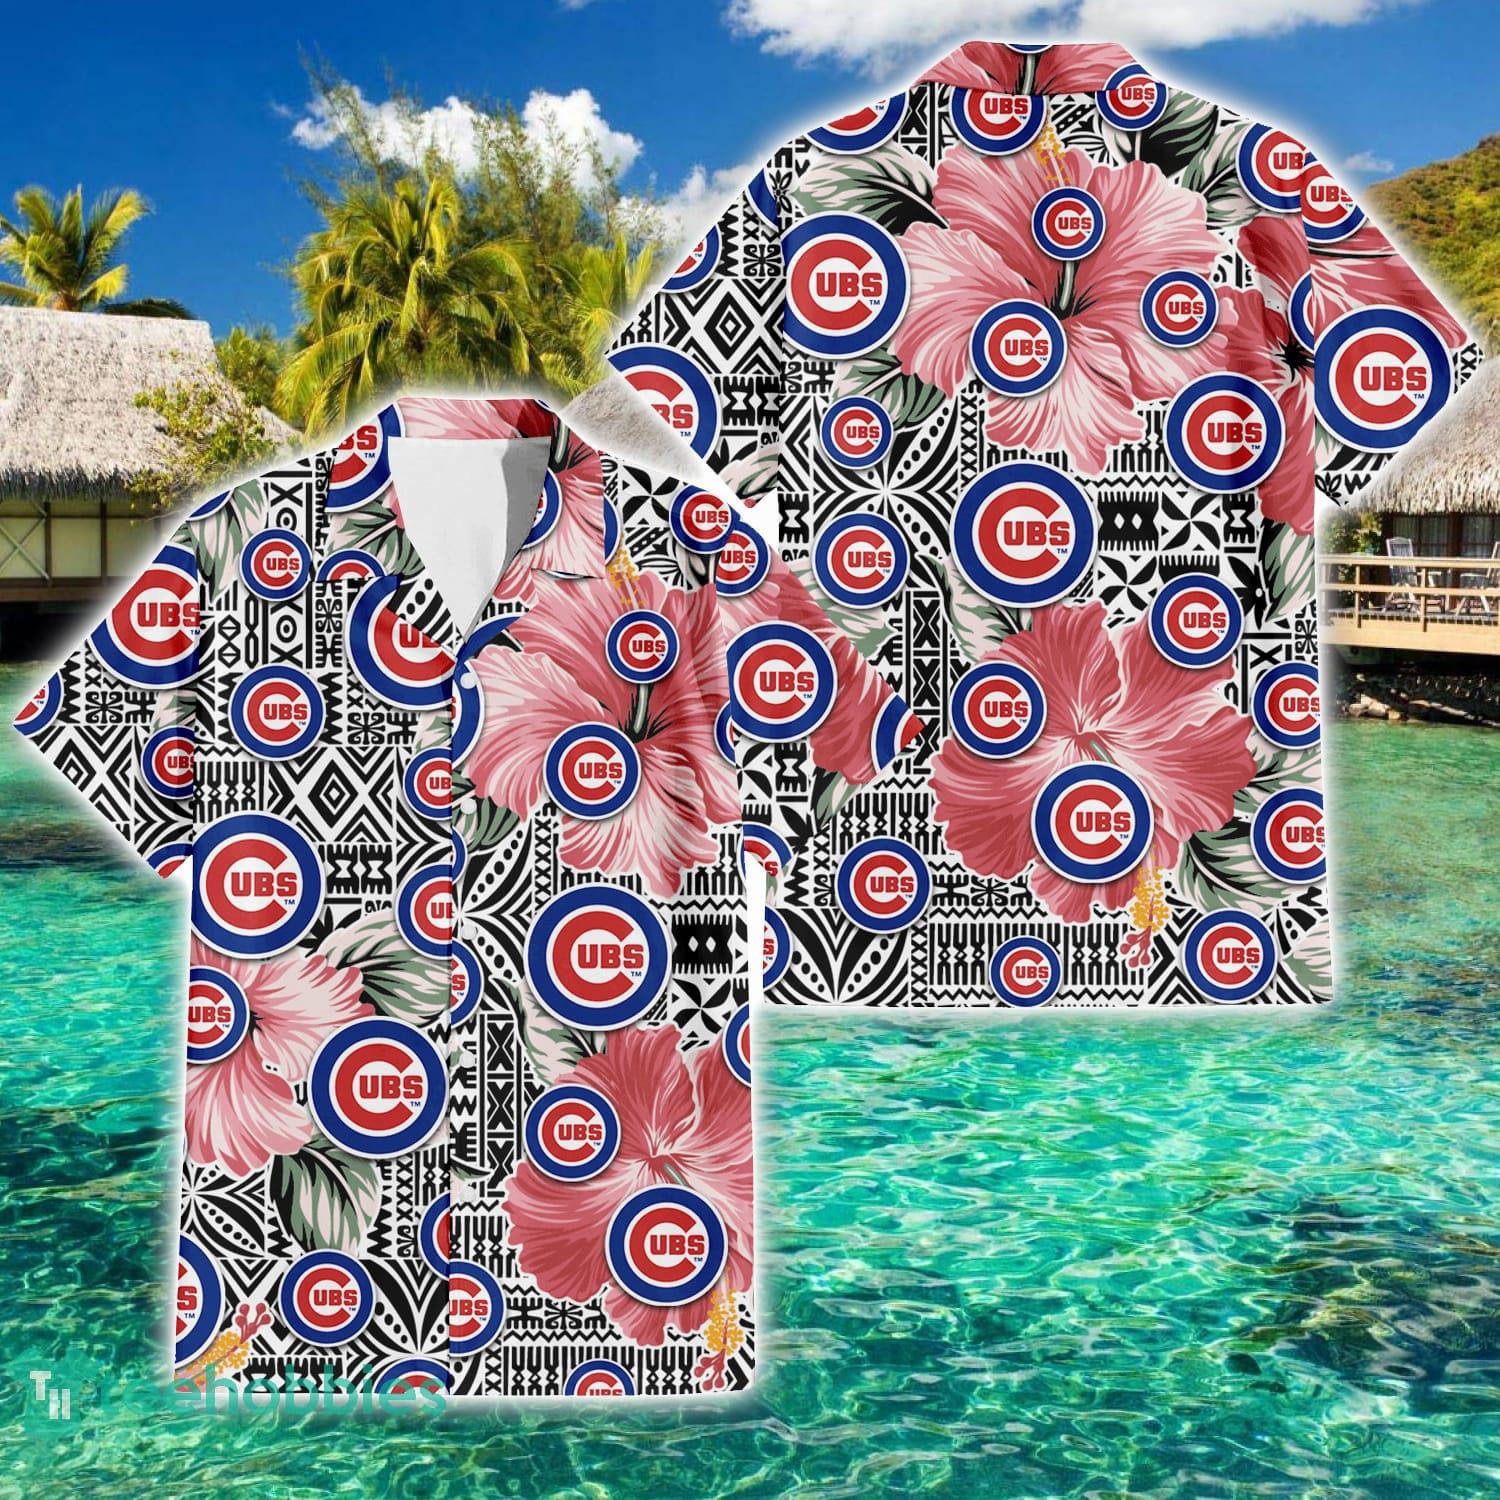 HOT NEW !! Chicago Cubs 2022 Field of Dreams Logo Unisex Cotton Shirt